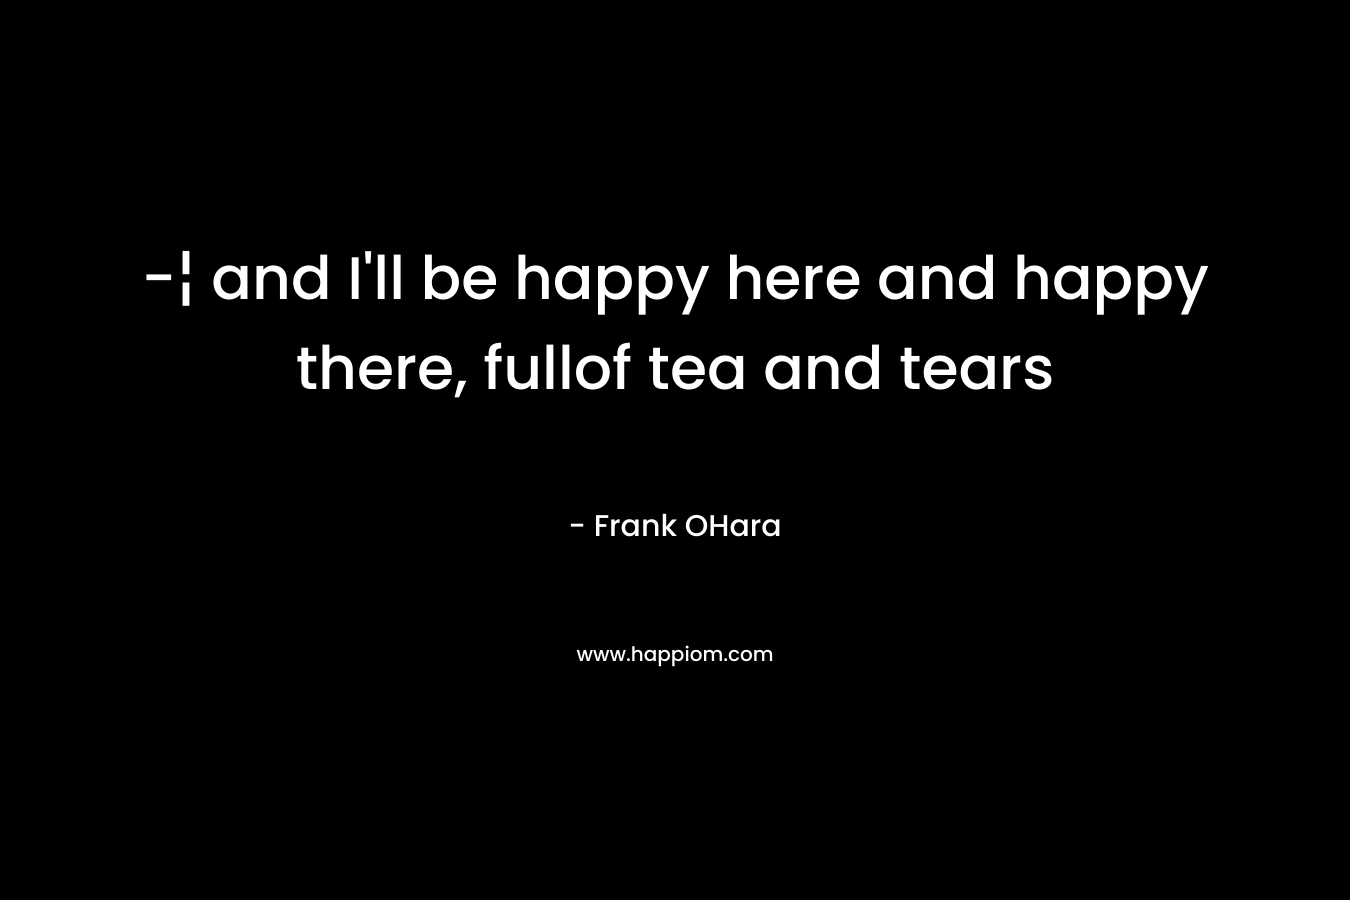 -¦ and I'll be happy here and happy there, fullof tea and tears